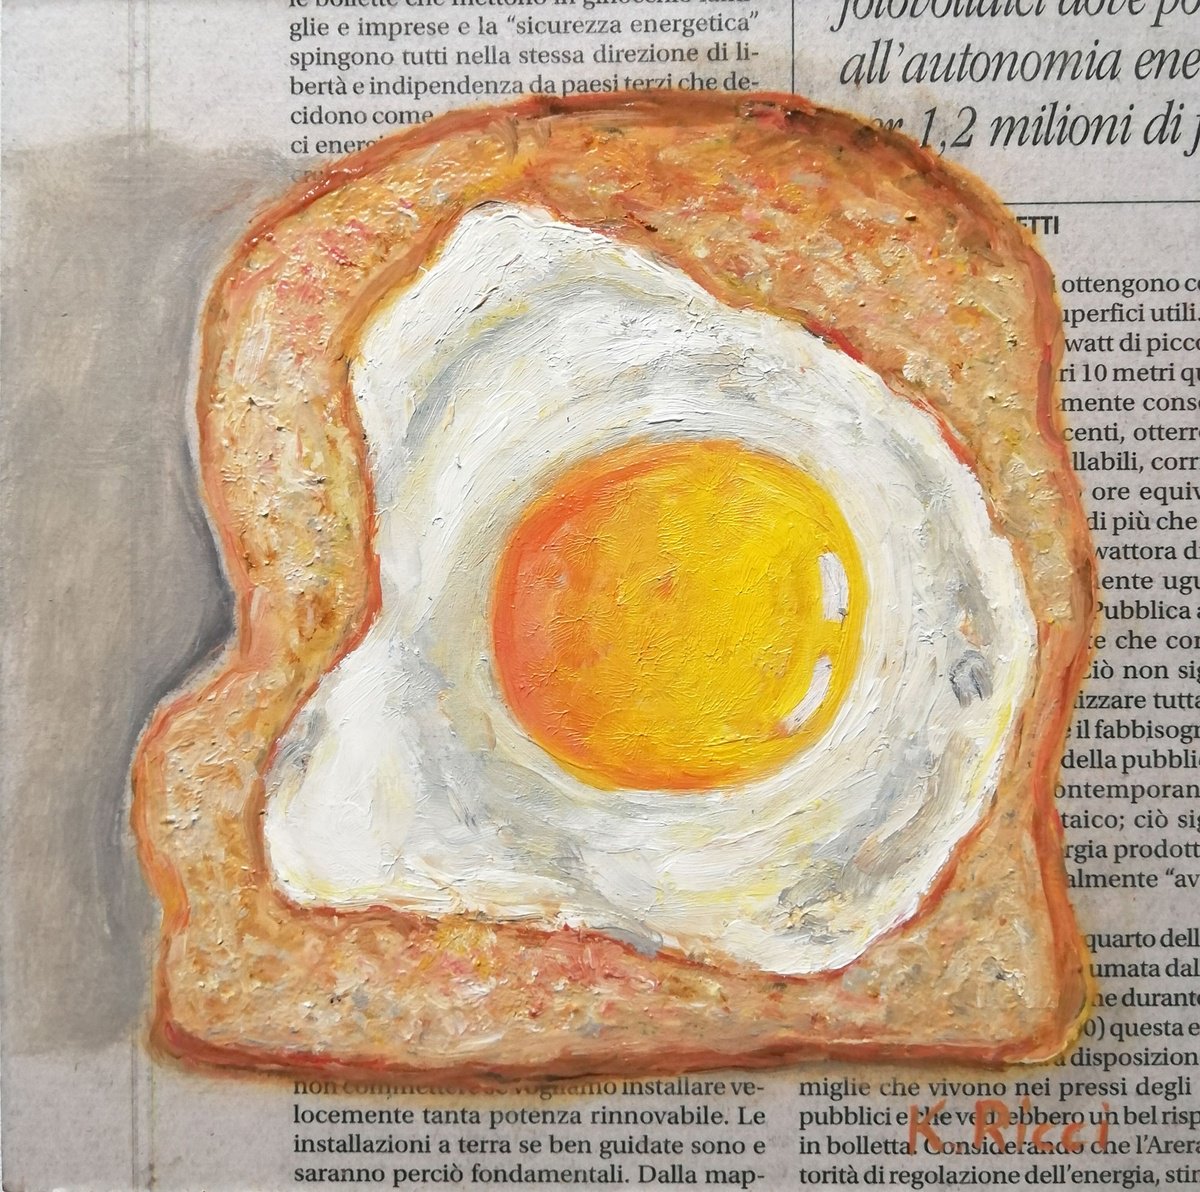 Toast with Fried Egg on Newspaper Original Oil on Wooden Board Painting 6 by 6 inches (1... by Katia Ricci